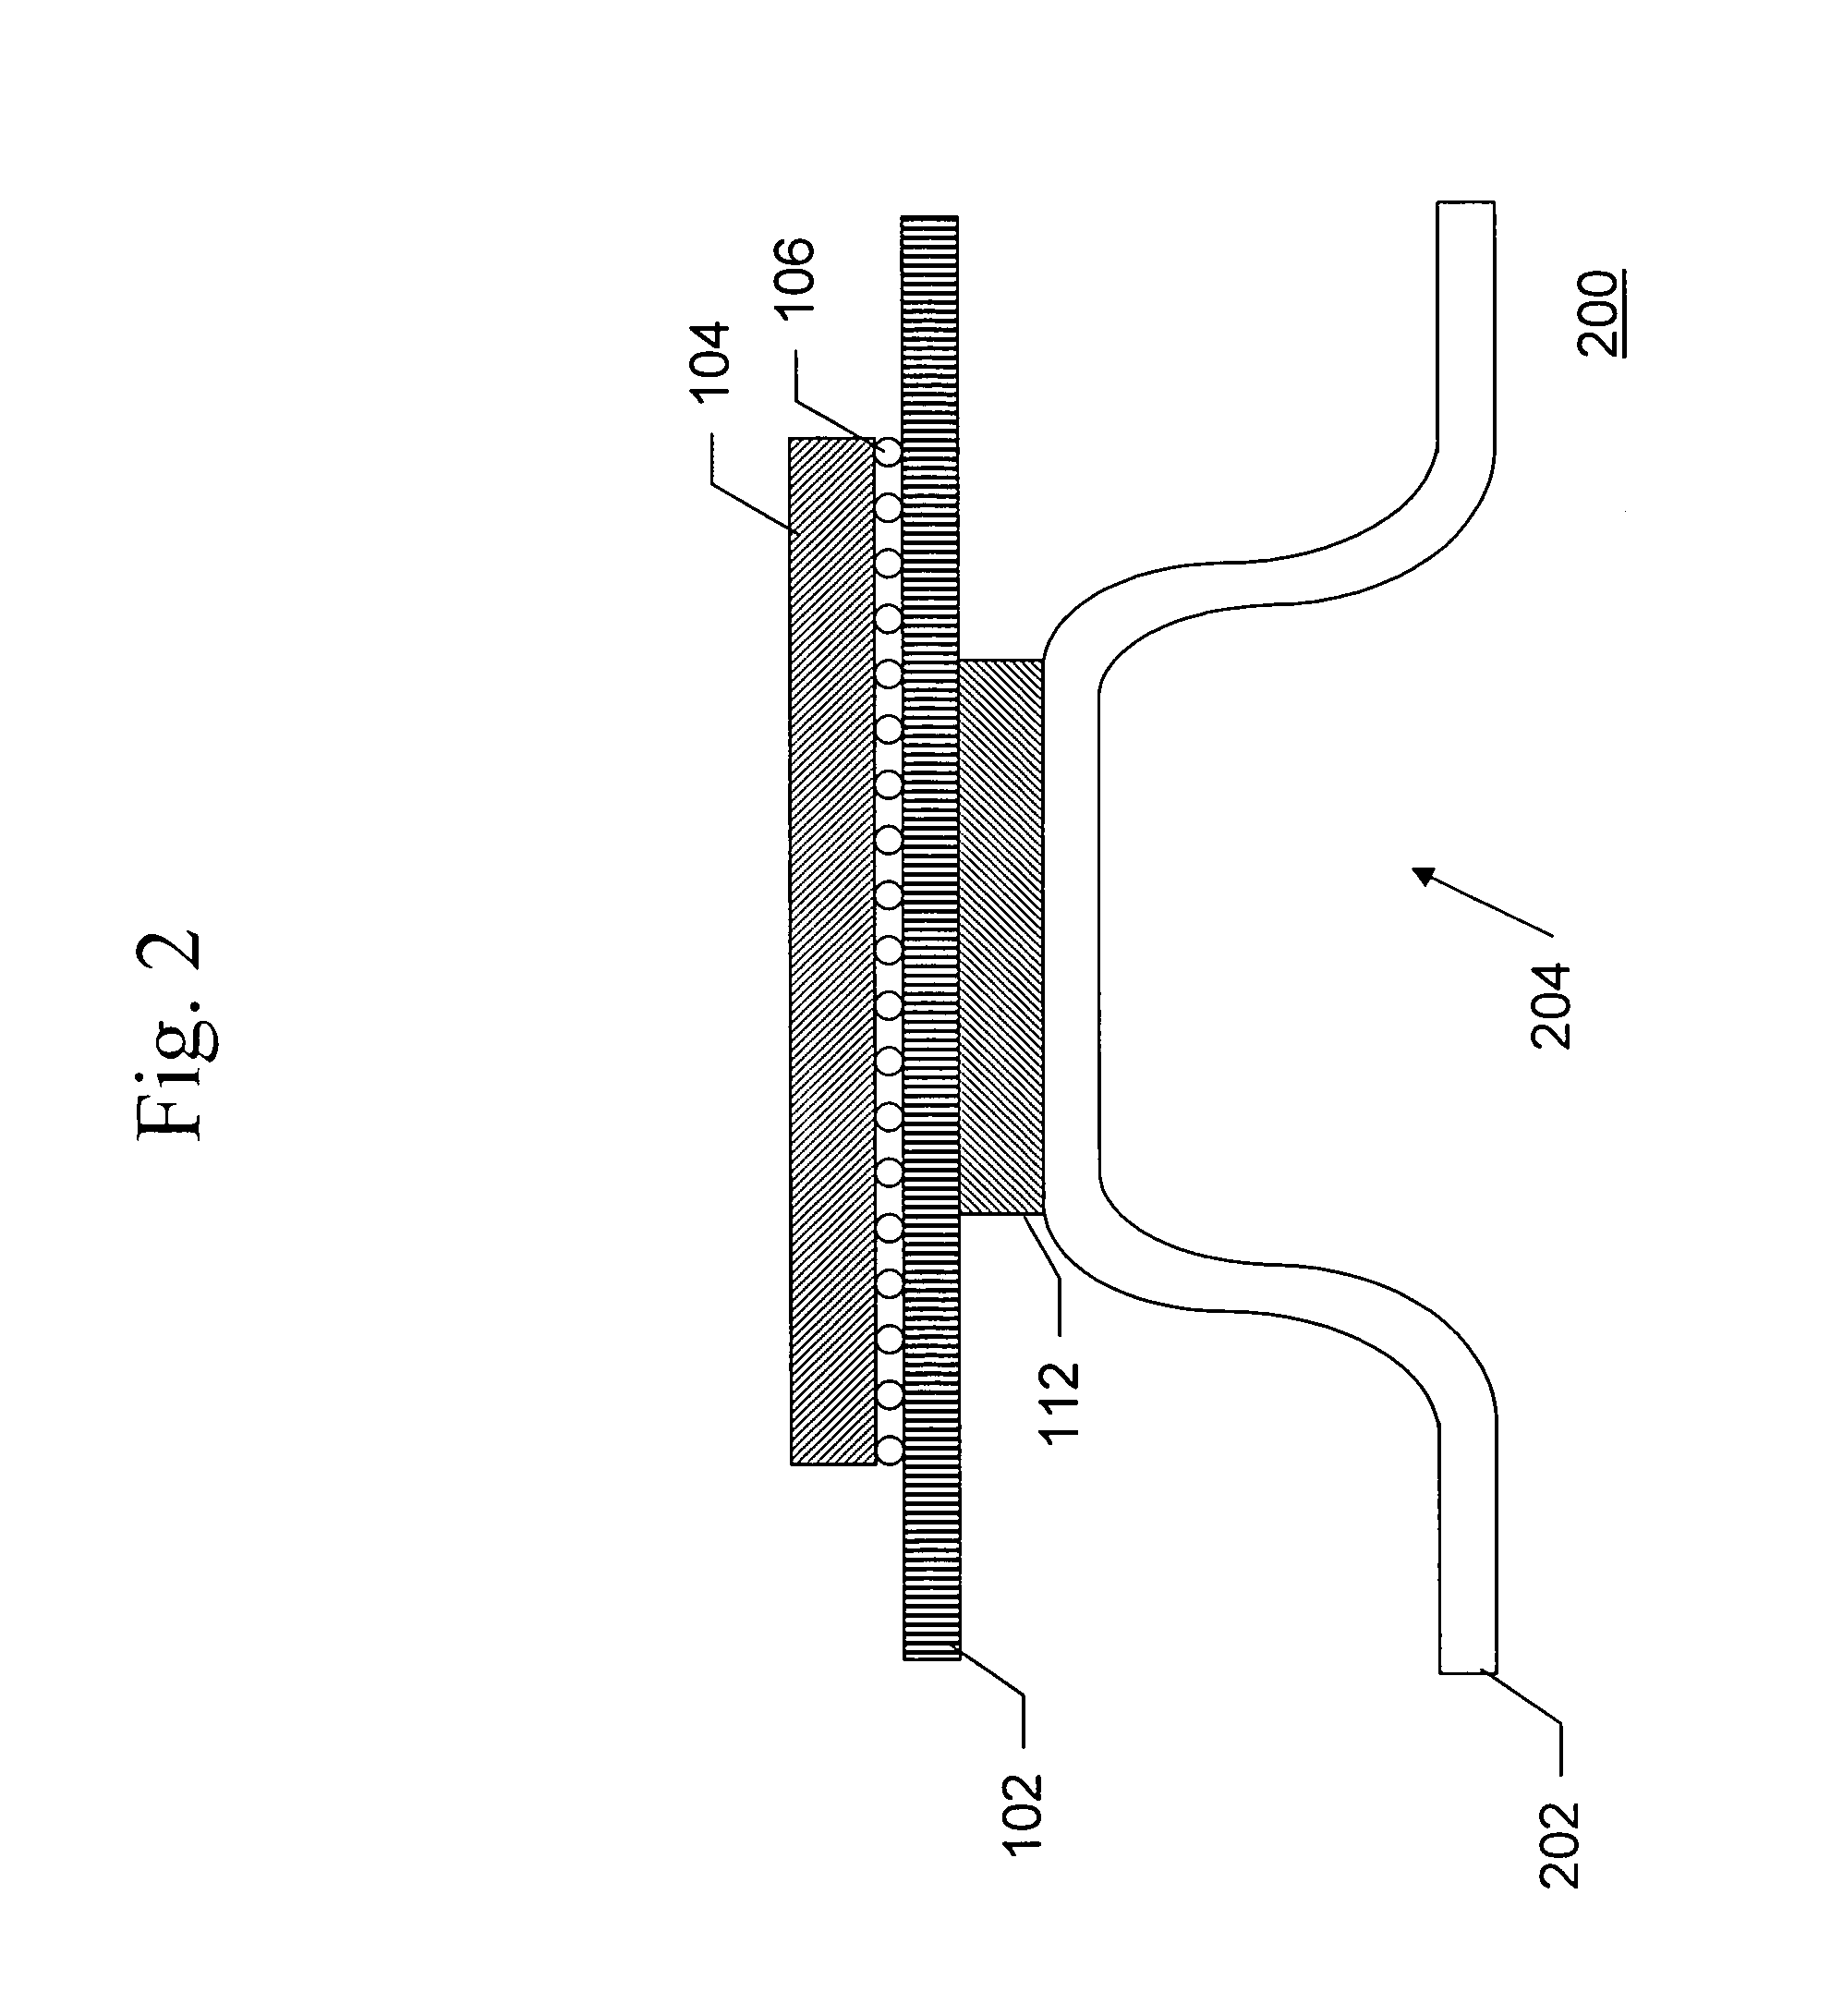 Conductive heat transfer for electrical devices from the solder side and component side of a circuit card assembly